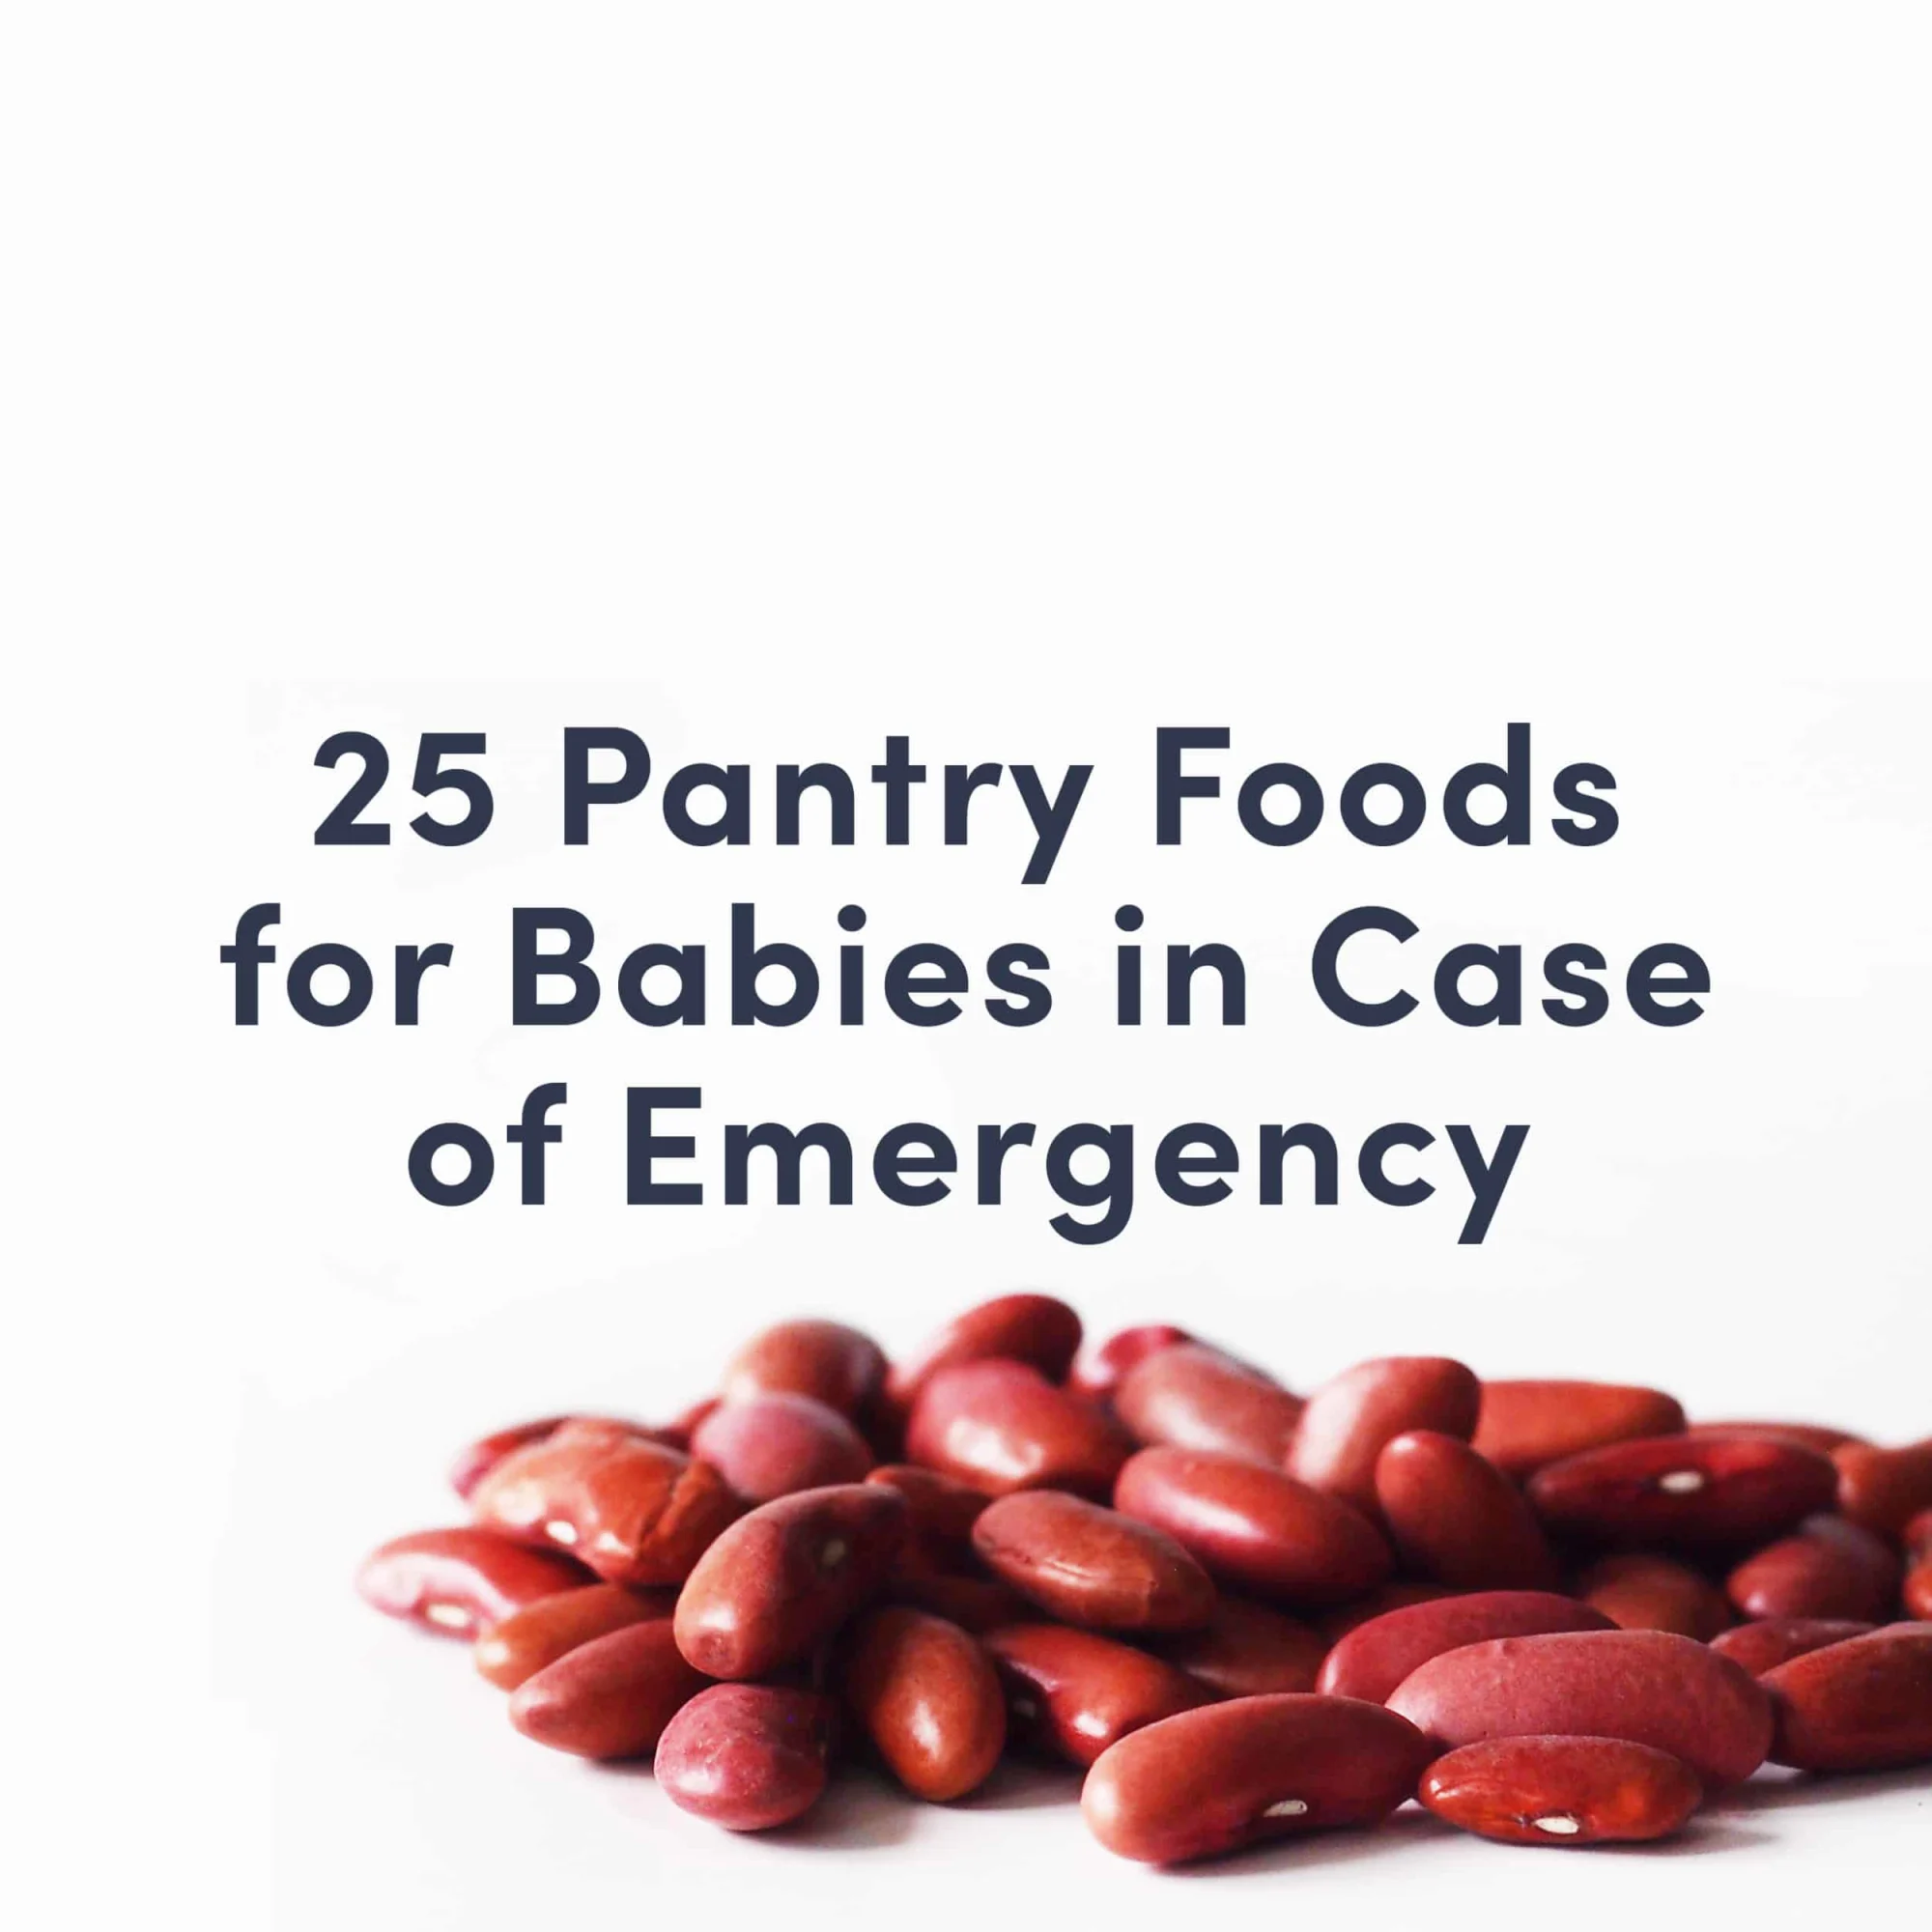 Title image with kidney beans that reads "25 Pantry Foods for Babies In Case of Emergency"